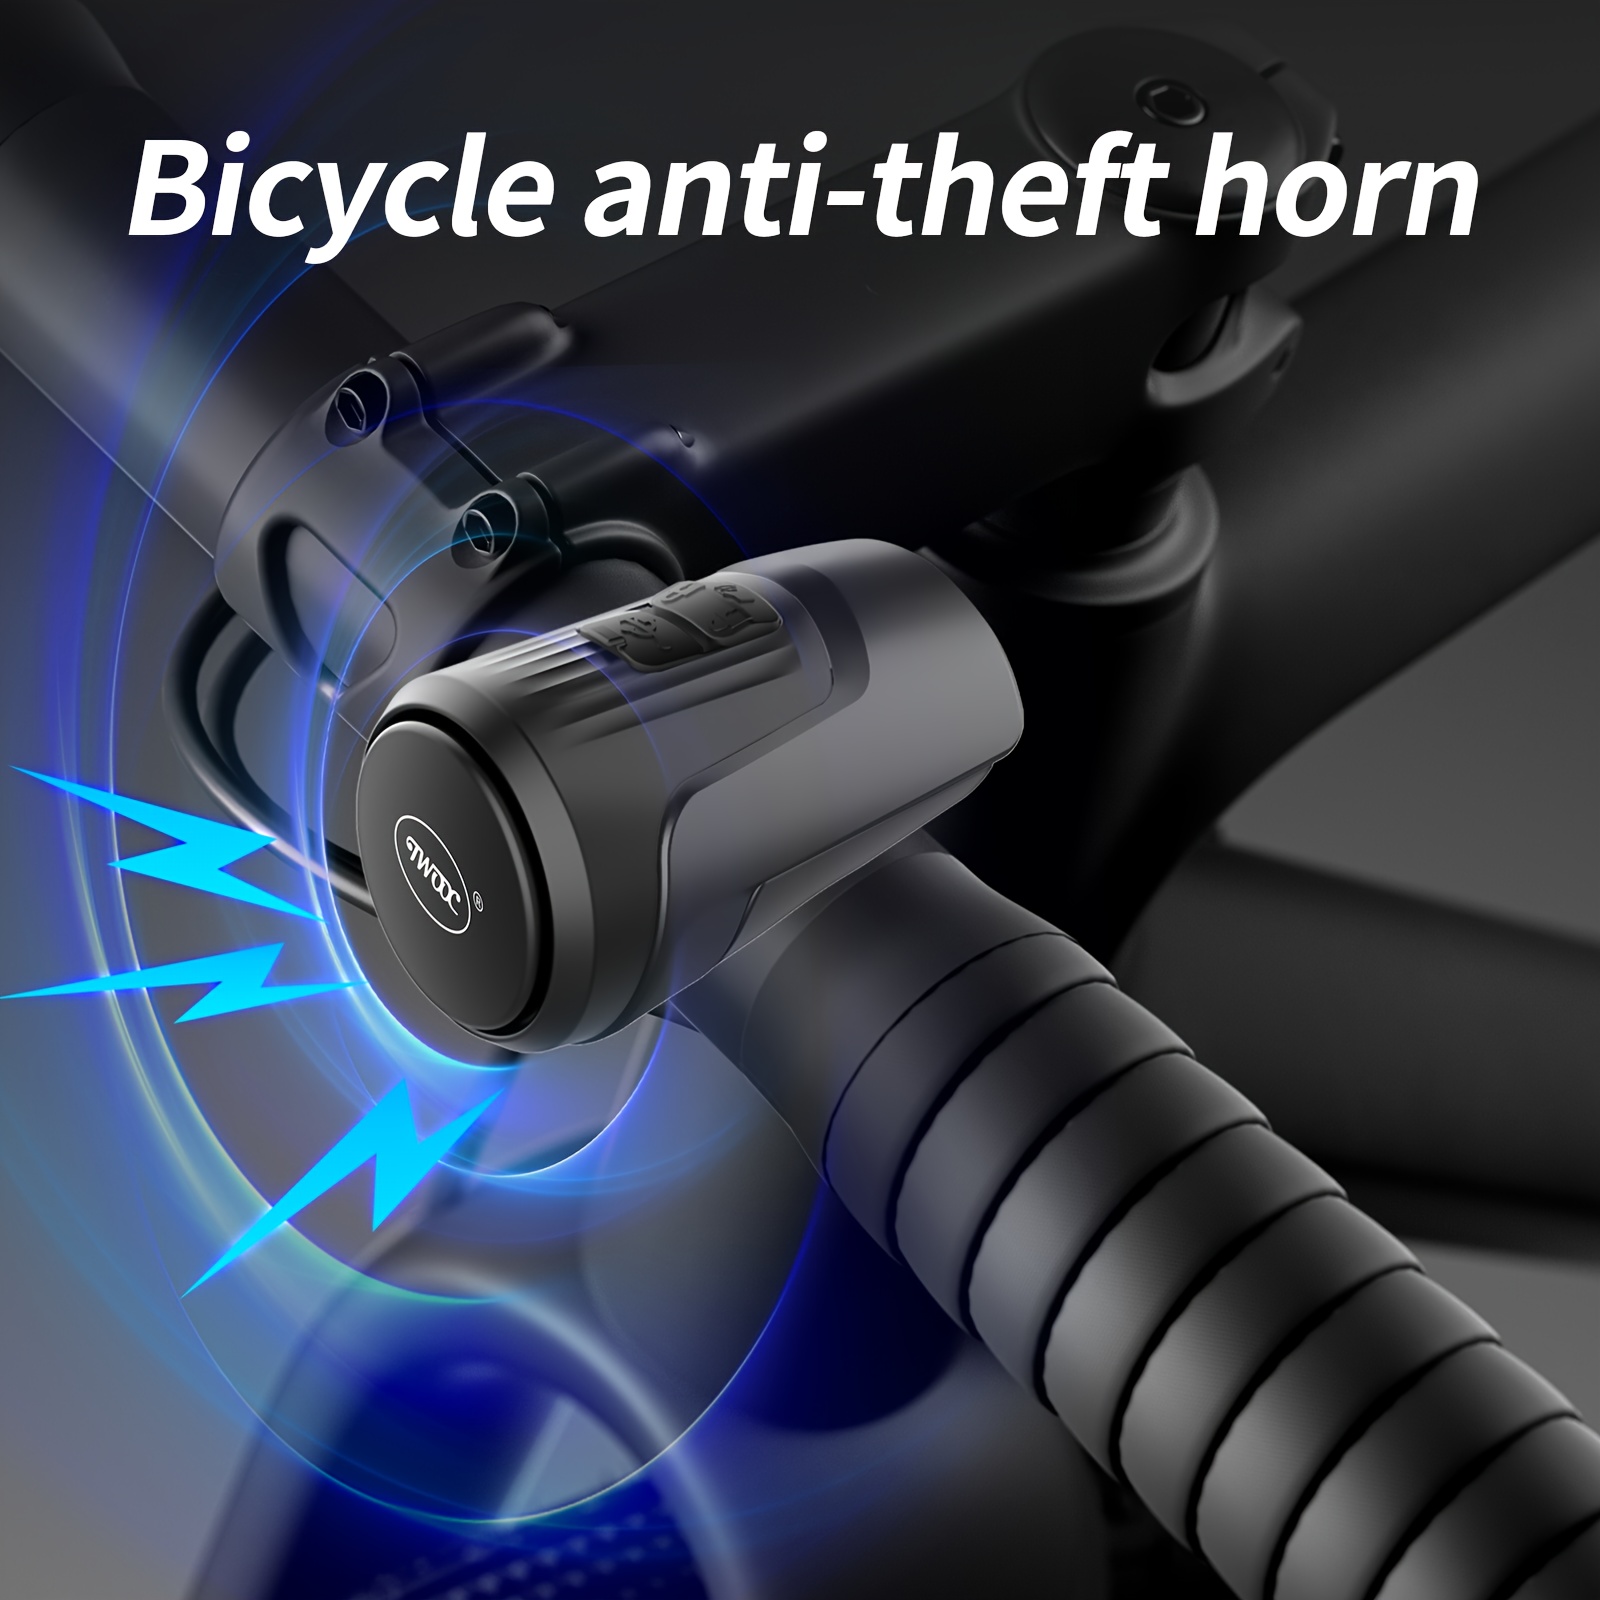 

Twooc 125 Bicycle Anti-theft Horn, Electronic Bicycle Bell, Ipx5 Waterproof Anti-theft Alarm, Rechargeable Electric Bicycle Bell